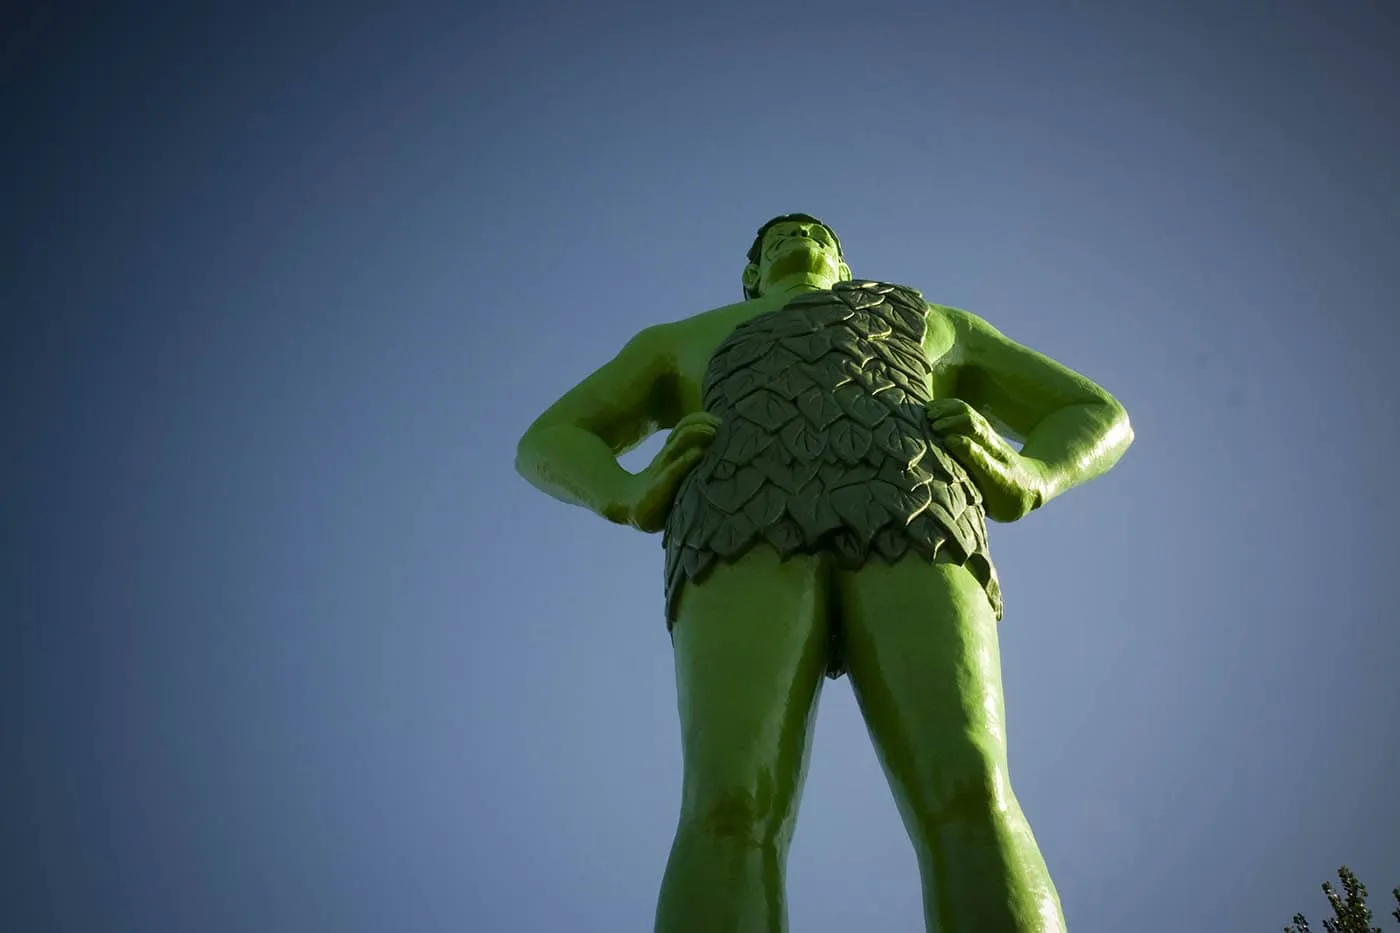 which canning company invented the jolly green giant